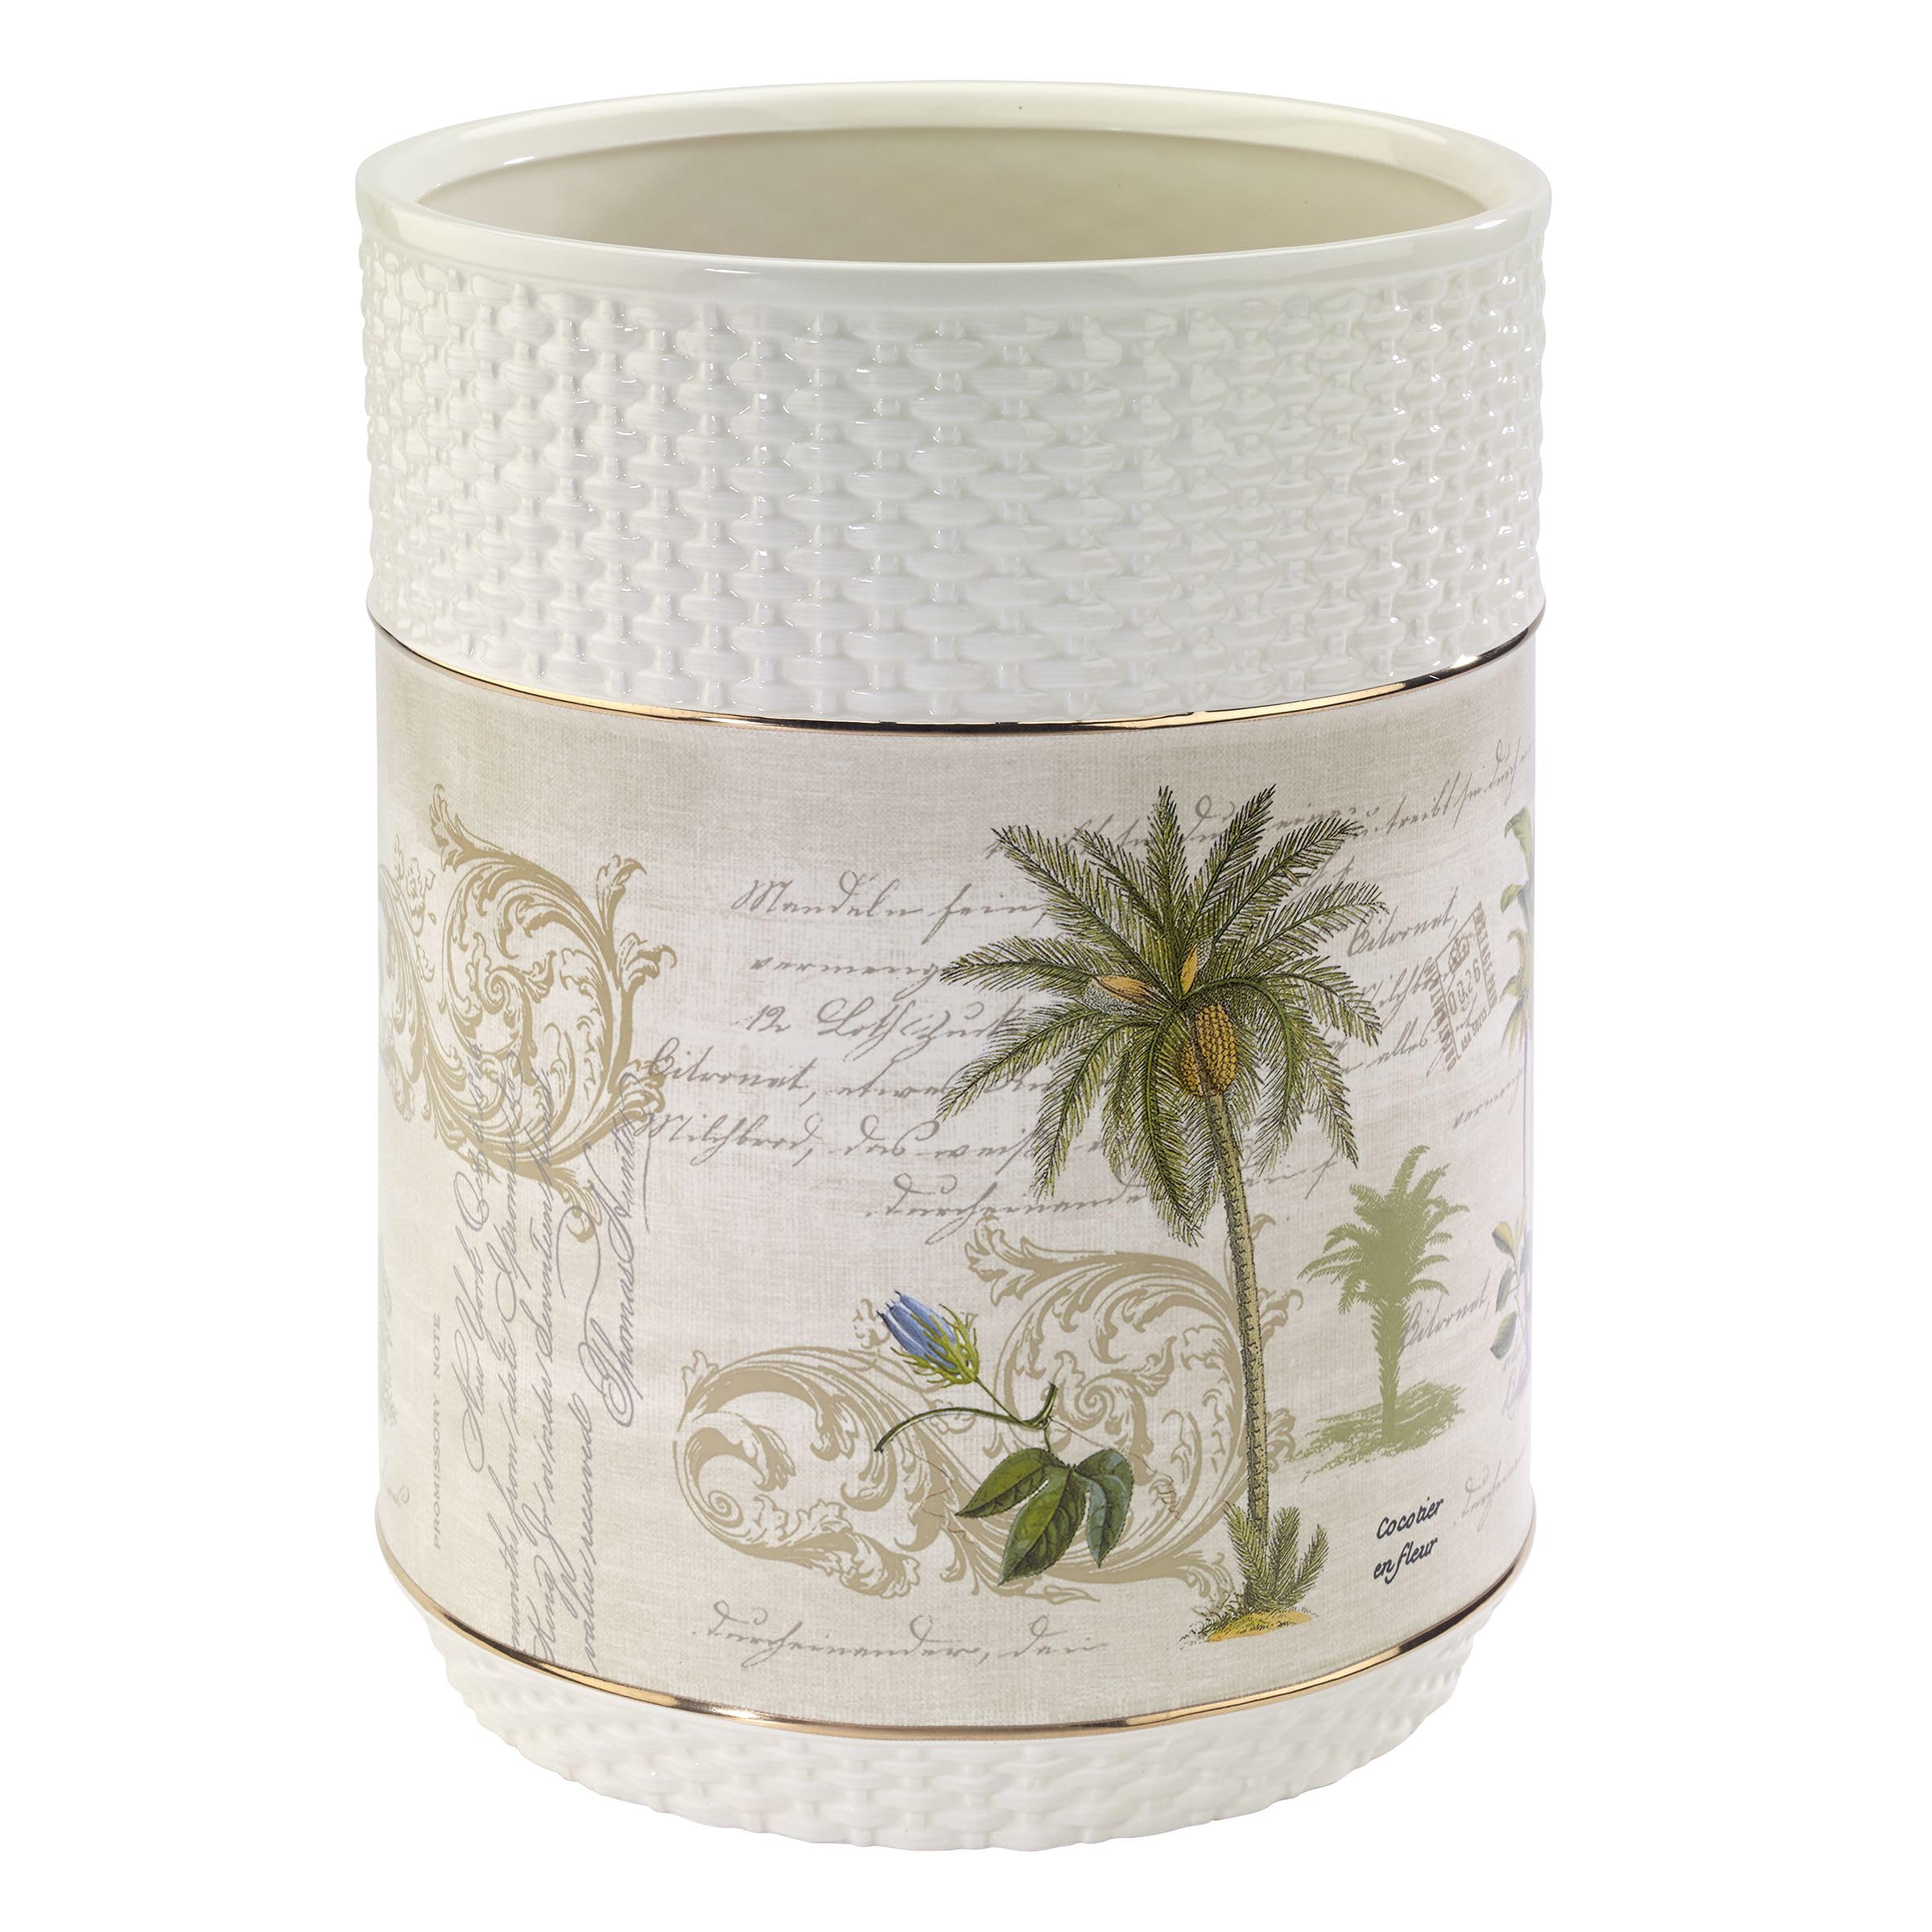 Avanti Linens - Waste Basket, Tropical Inspired Bathroom Accessories, Decorative Trash Can for Home or Office (Colony Palm Collection)